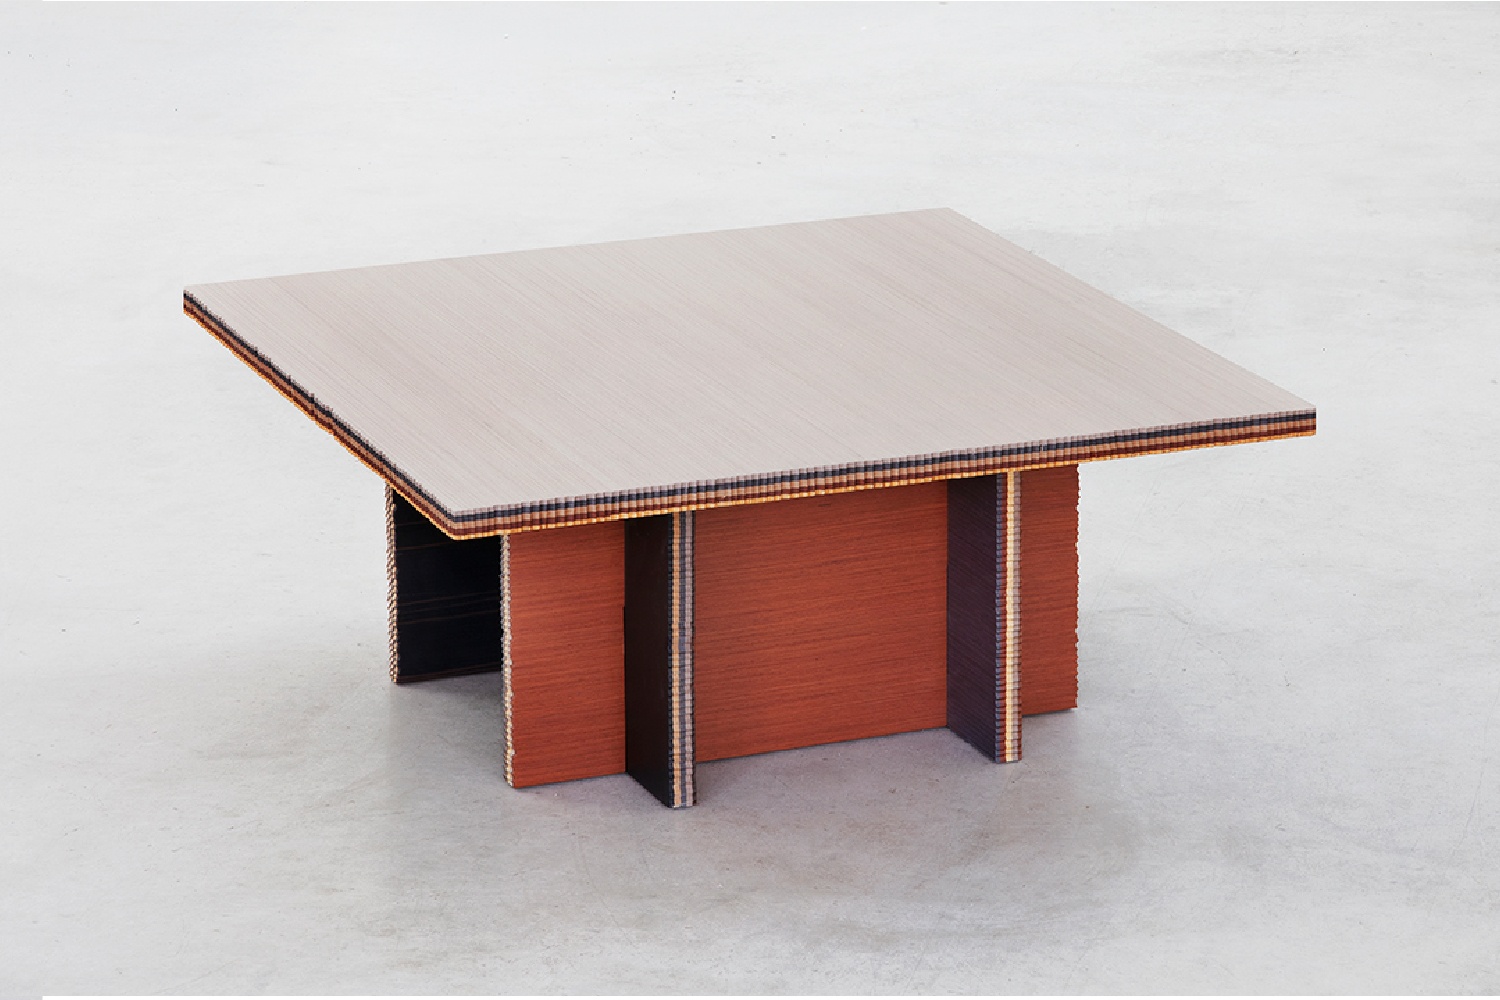 ALPI reclaimed wood in the new “George” collection of tables designed by Marco Campardo for SEEDS London Gallery